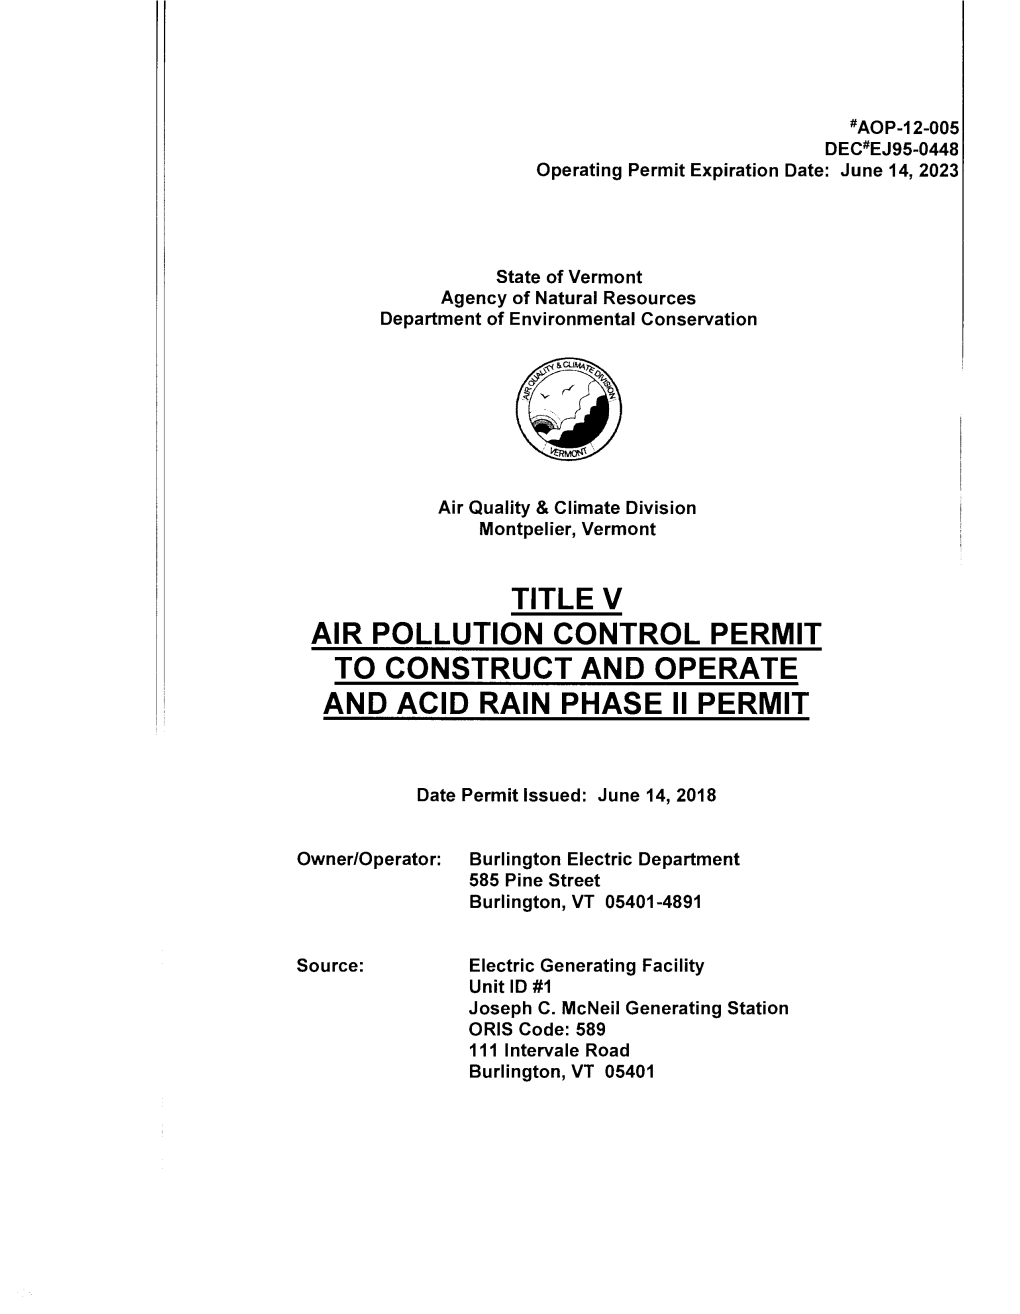 Title V Air Pollution Control Permit to Construct and Operate and Acid Rain Phase Ii Permit